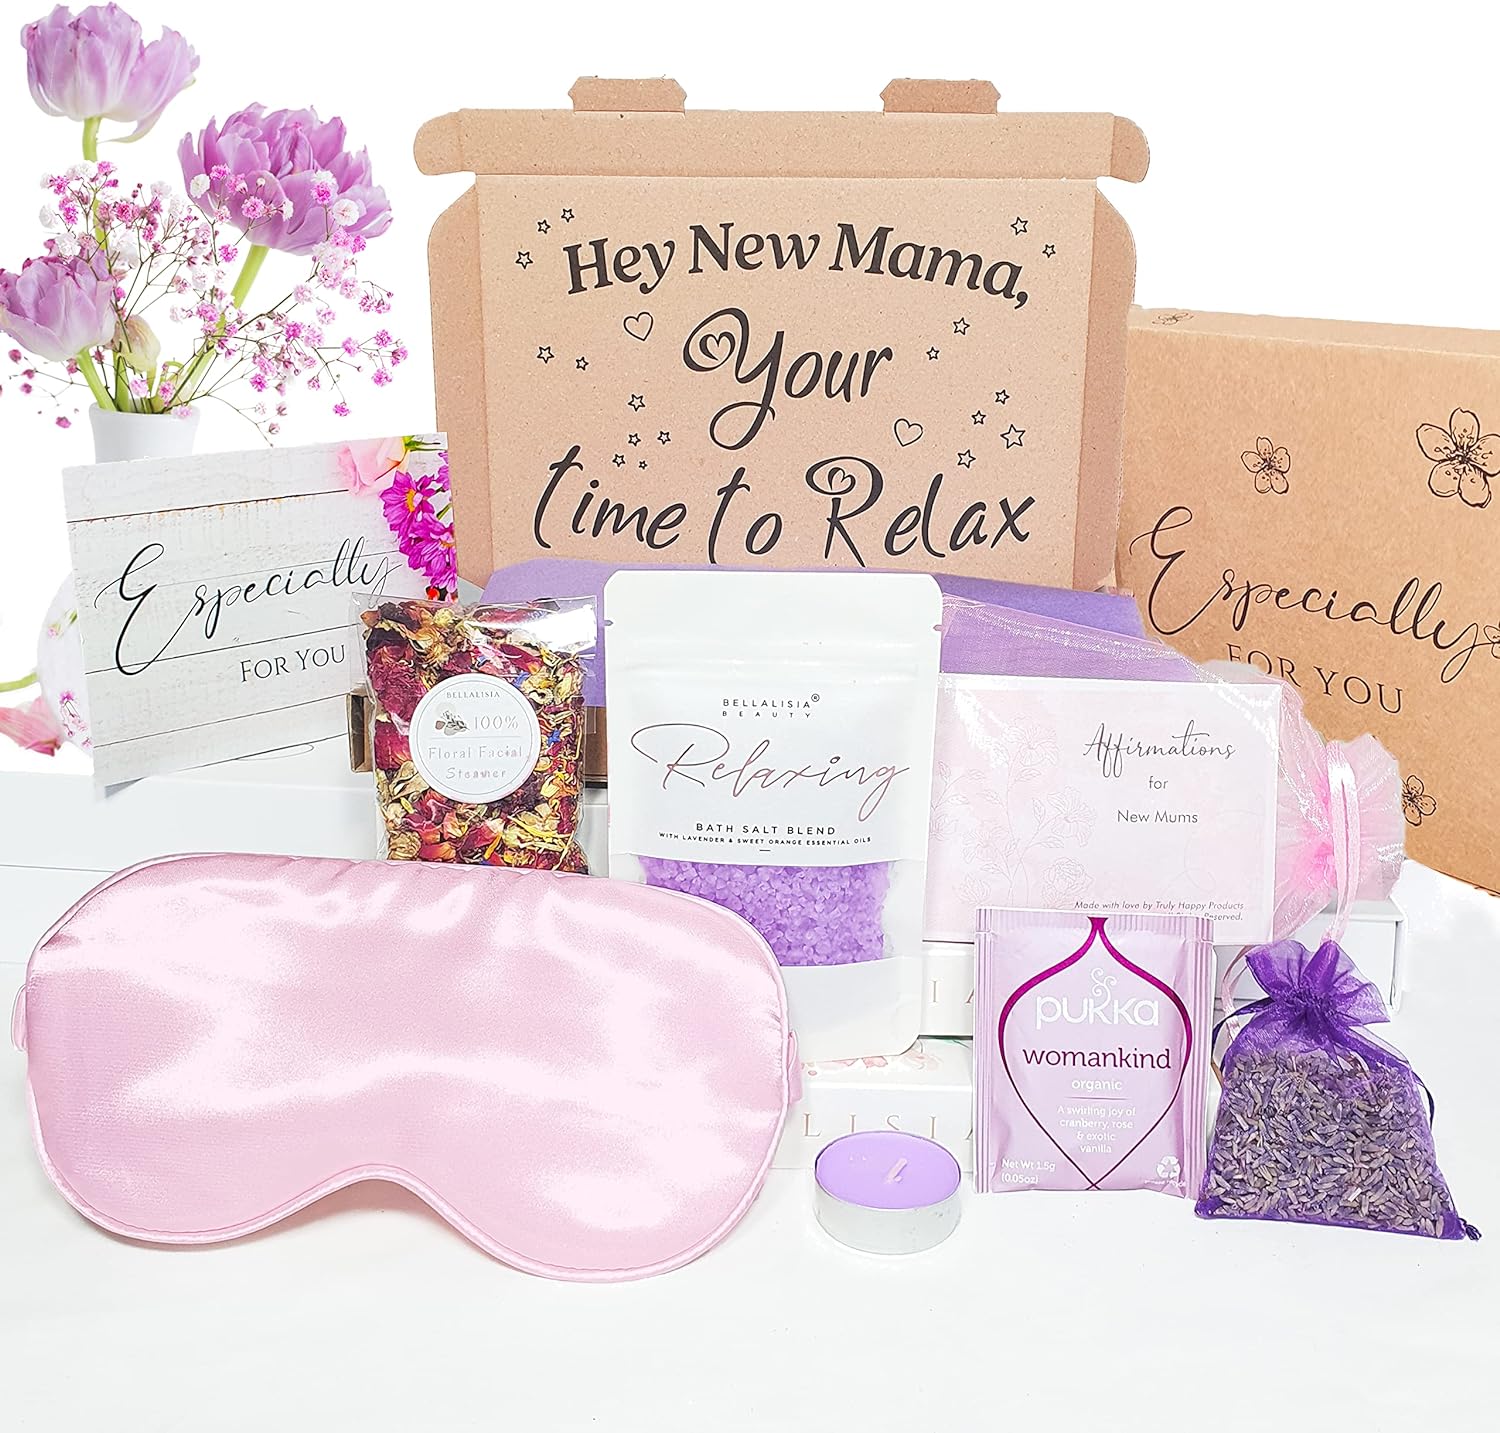 Bellalisia New Mum Pamper Kit, Lovely Relaxing Baby Shower Gifts for Mums To Be For Her To Pamper and Relax. New Mum Hamper Presents. Mums Self Care Spa Box Set, Women Beauty Gifts For Mummy to Enjoy.